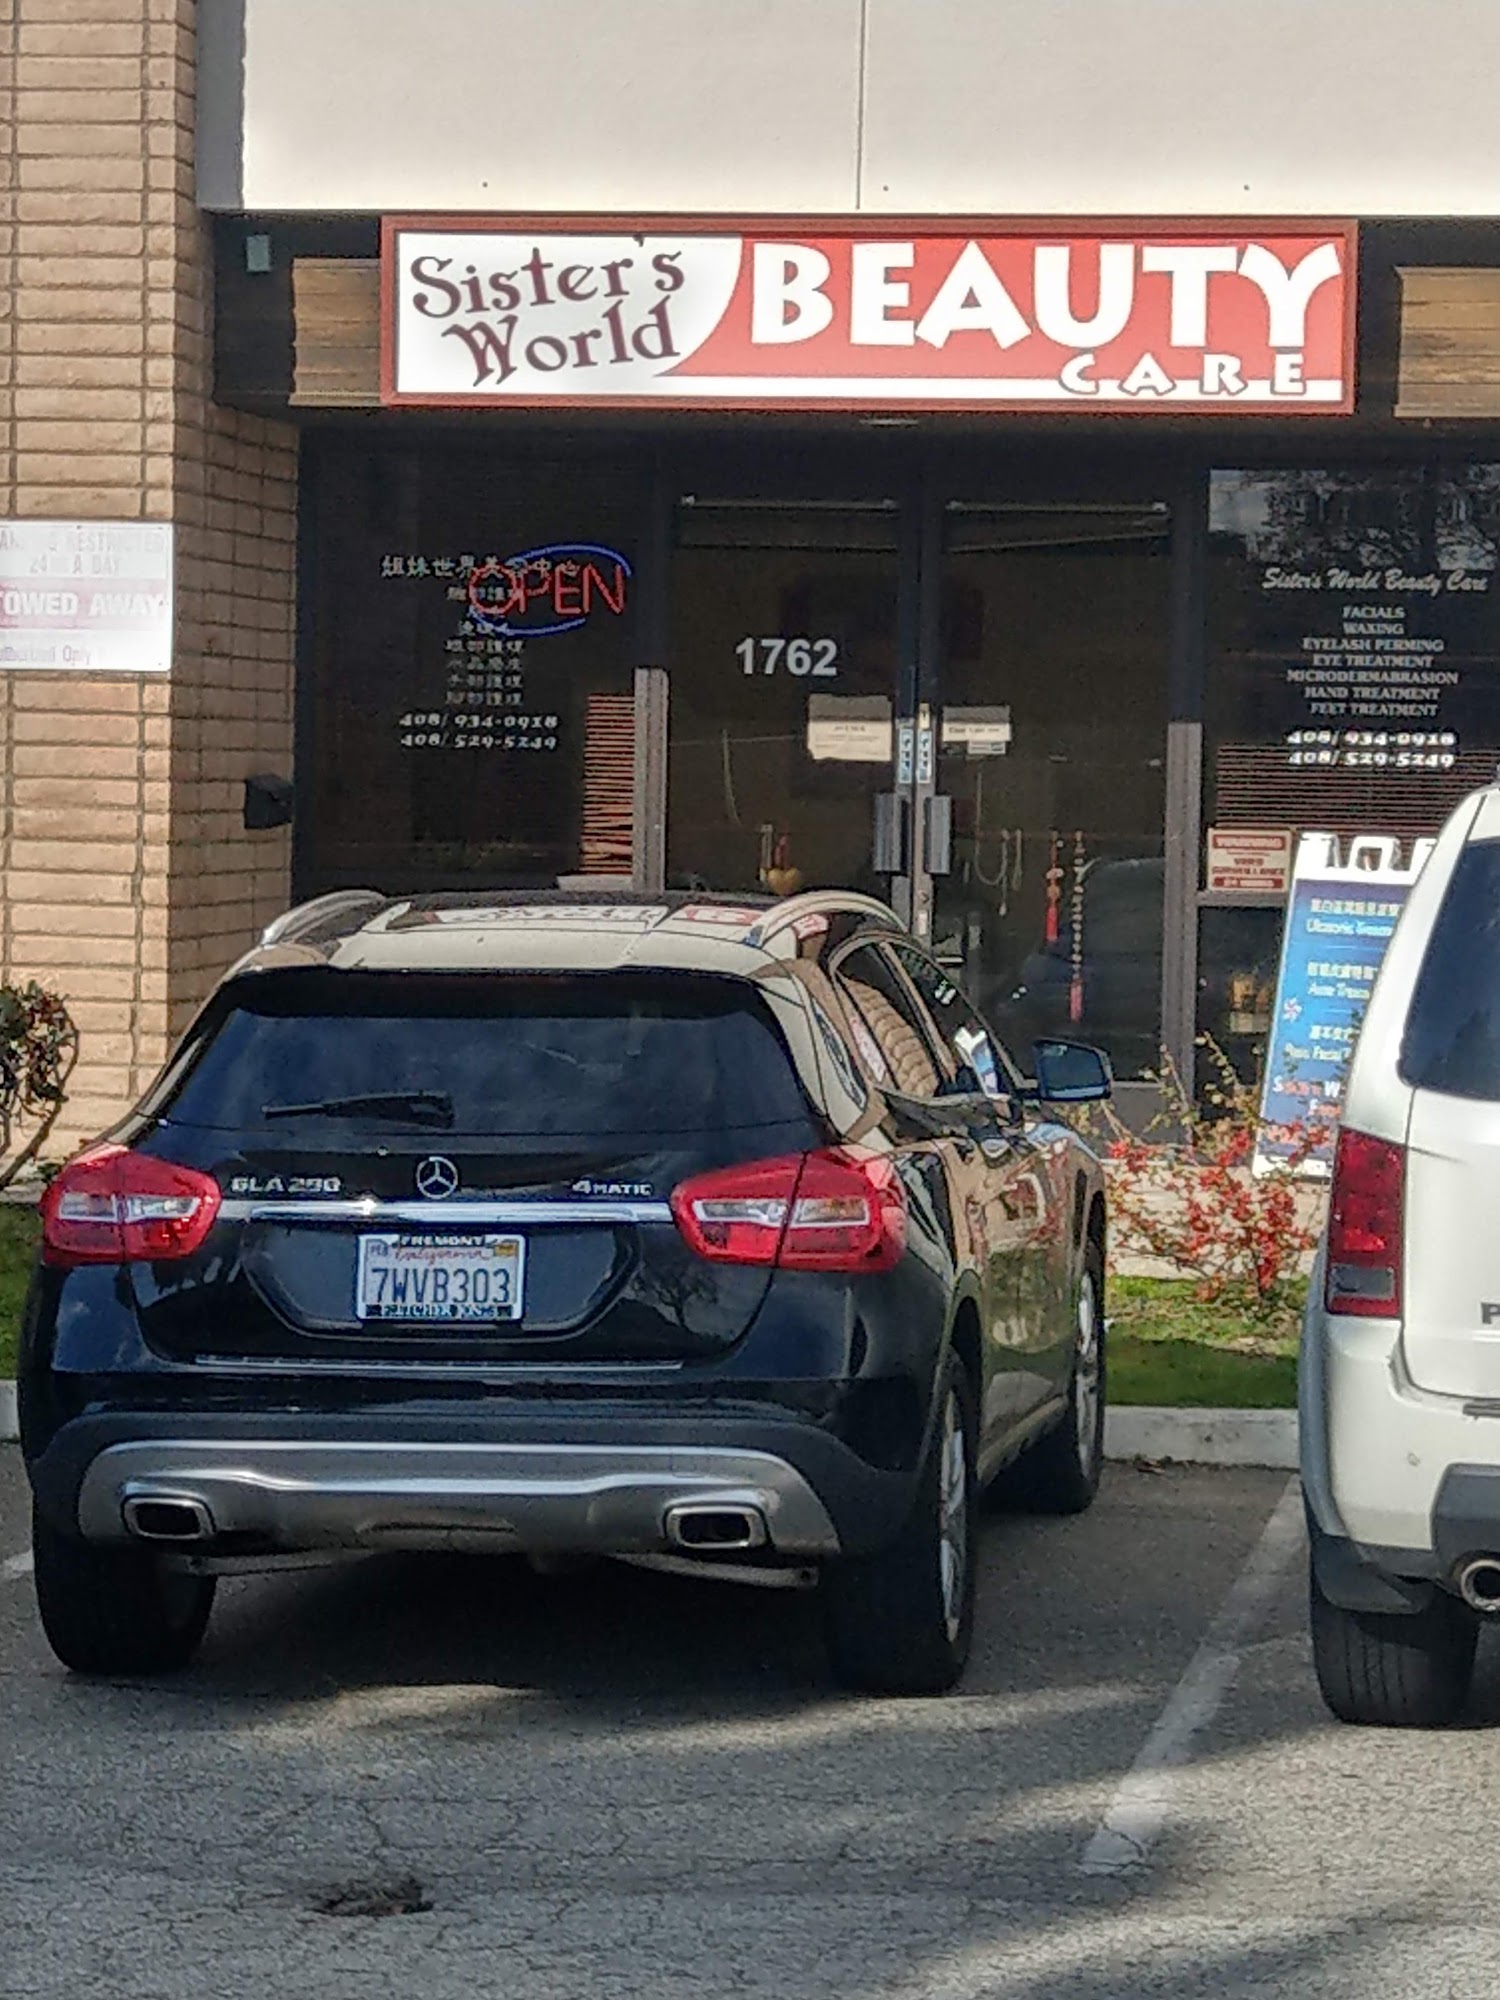 Sisters World Beauty Care